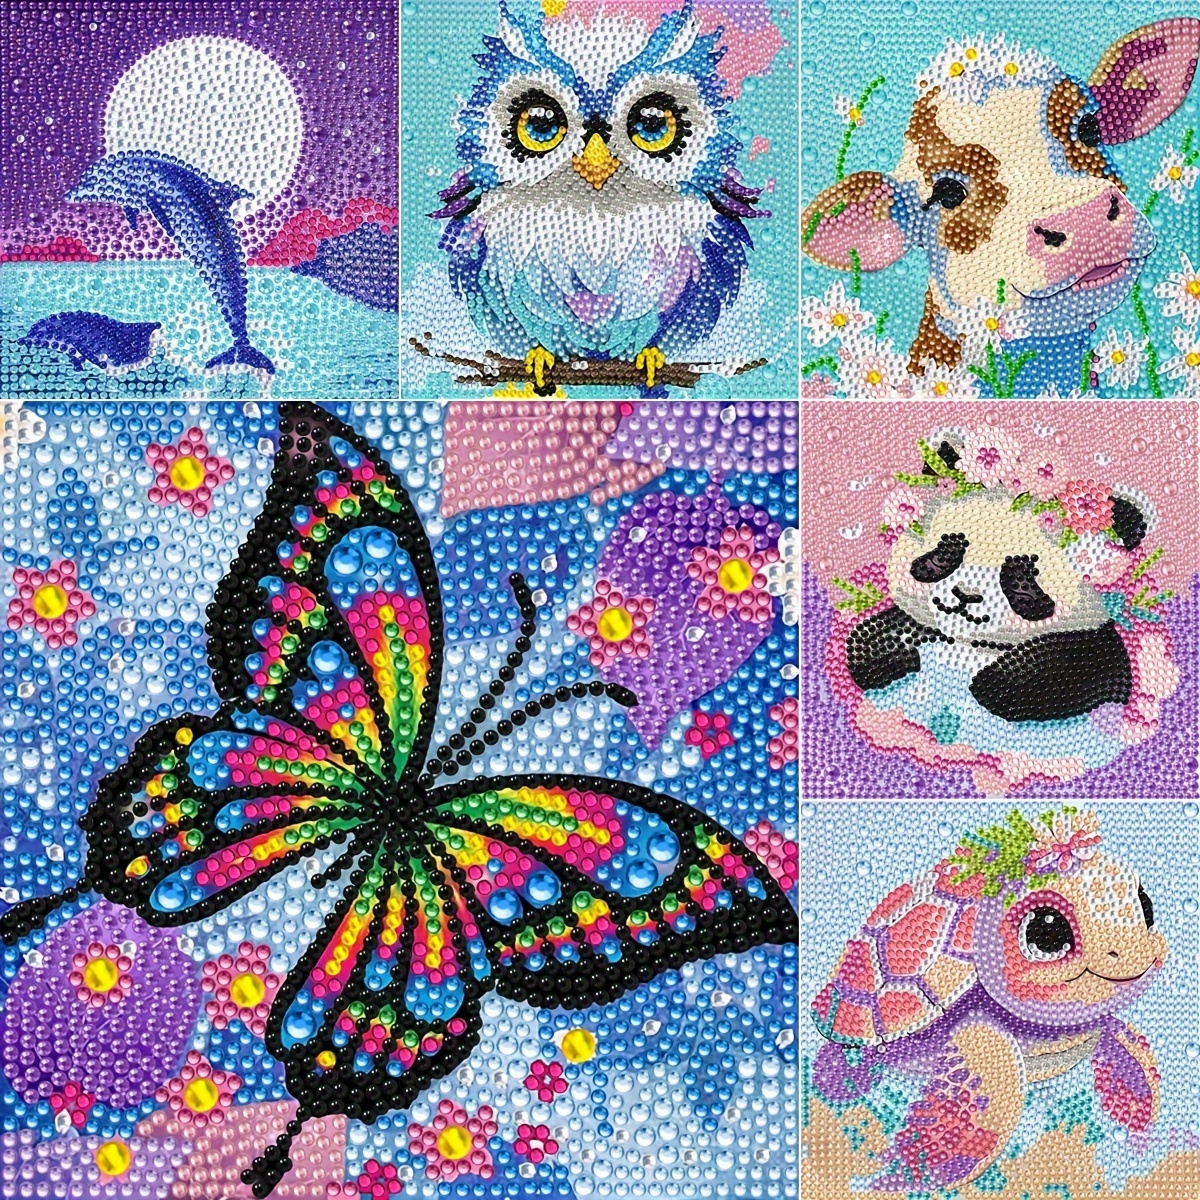 

Butterfly Owl Dolphin Turtle Cow Panda Pattern 5d Diamond Art Painting Kit, For Beginners, Diy Diamond Art Crafts, Suitable For Home Wall Decoration, 18*18cm/7.08*7.08in